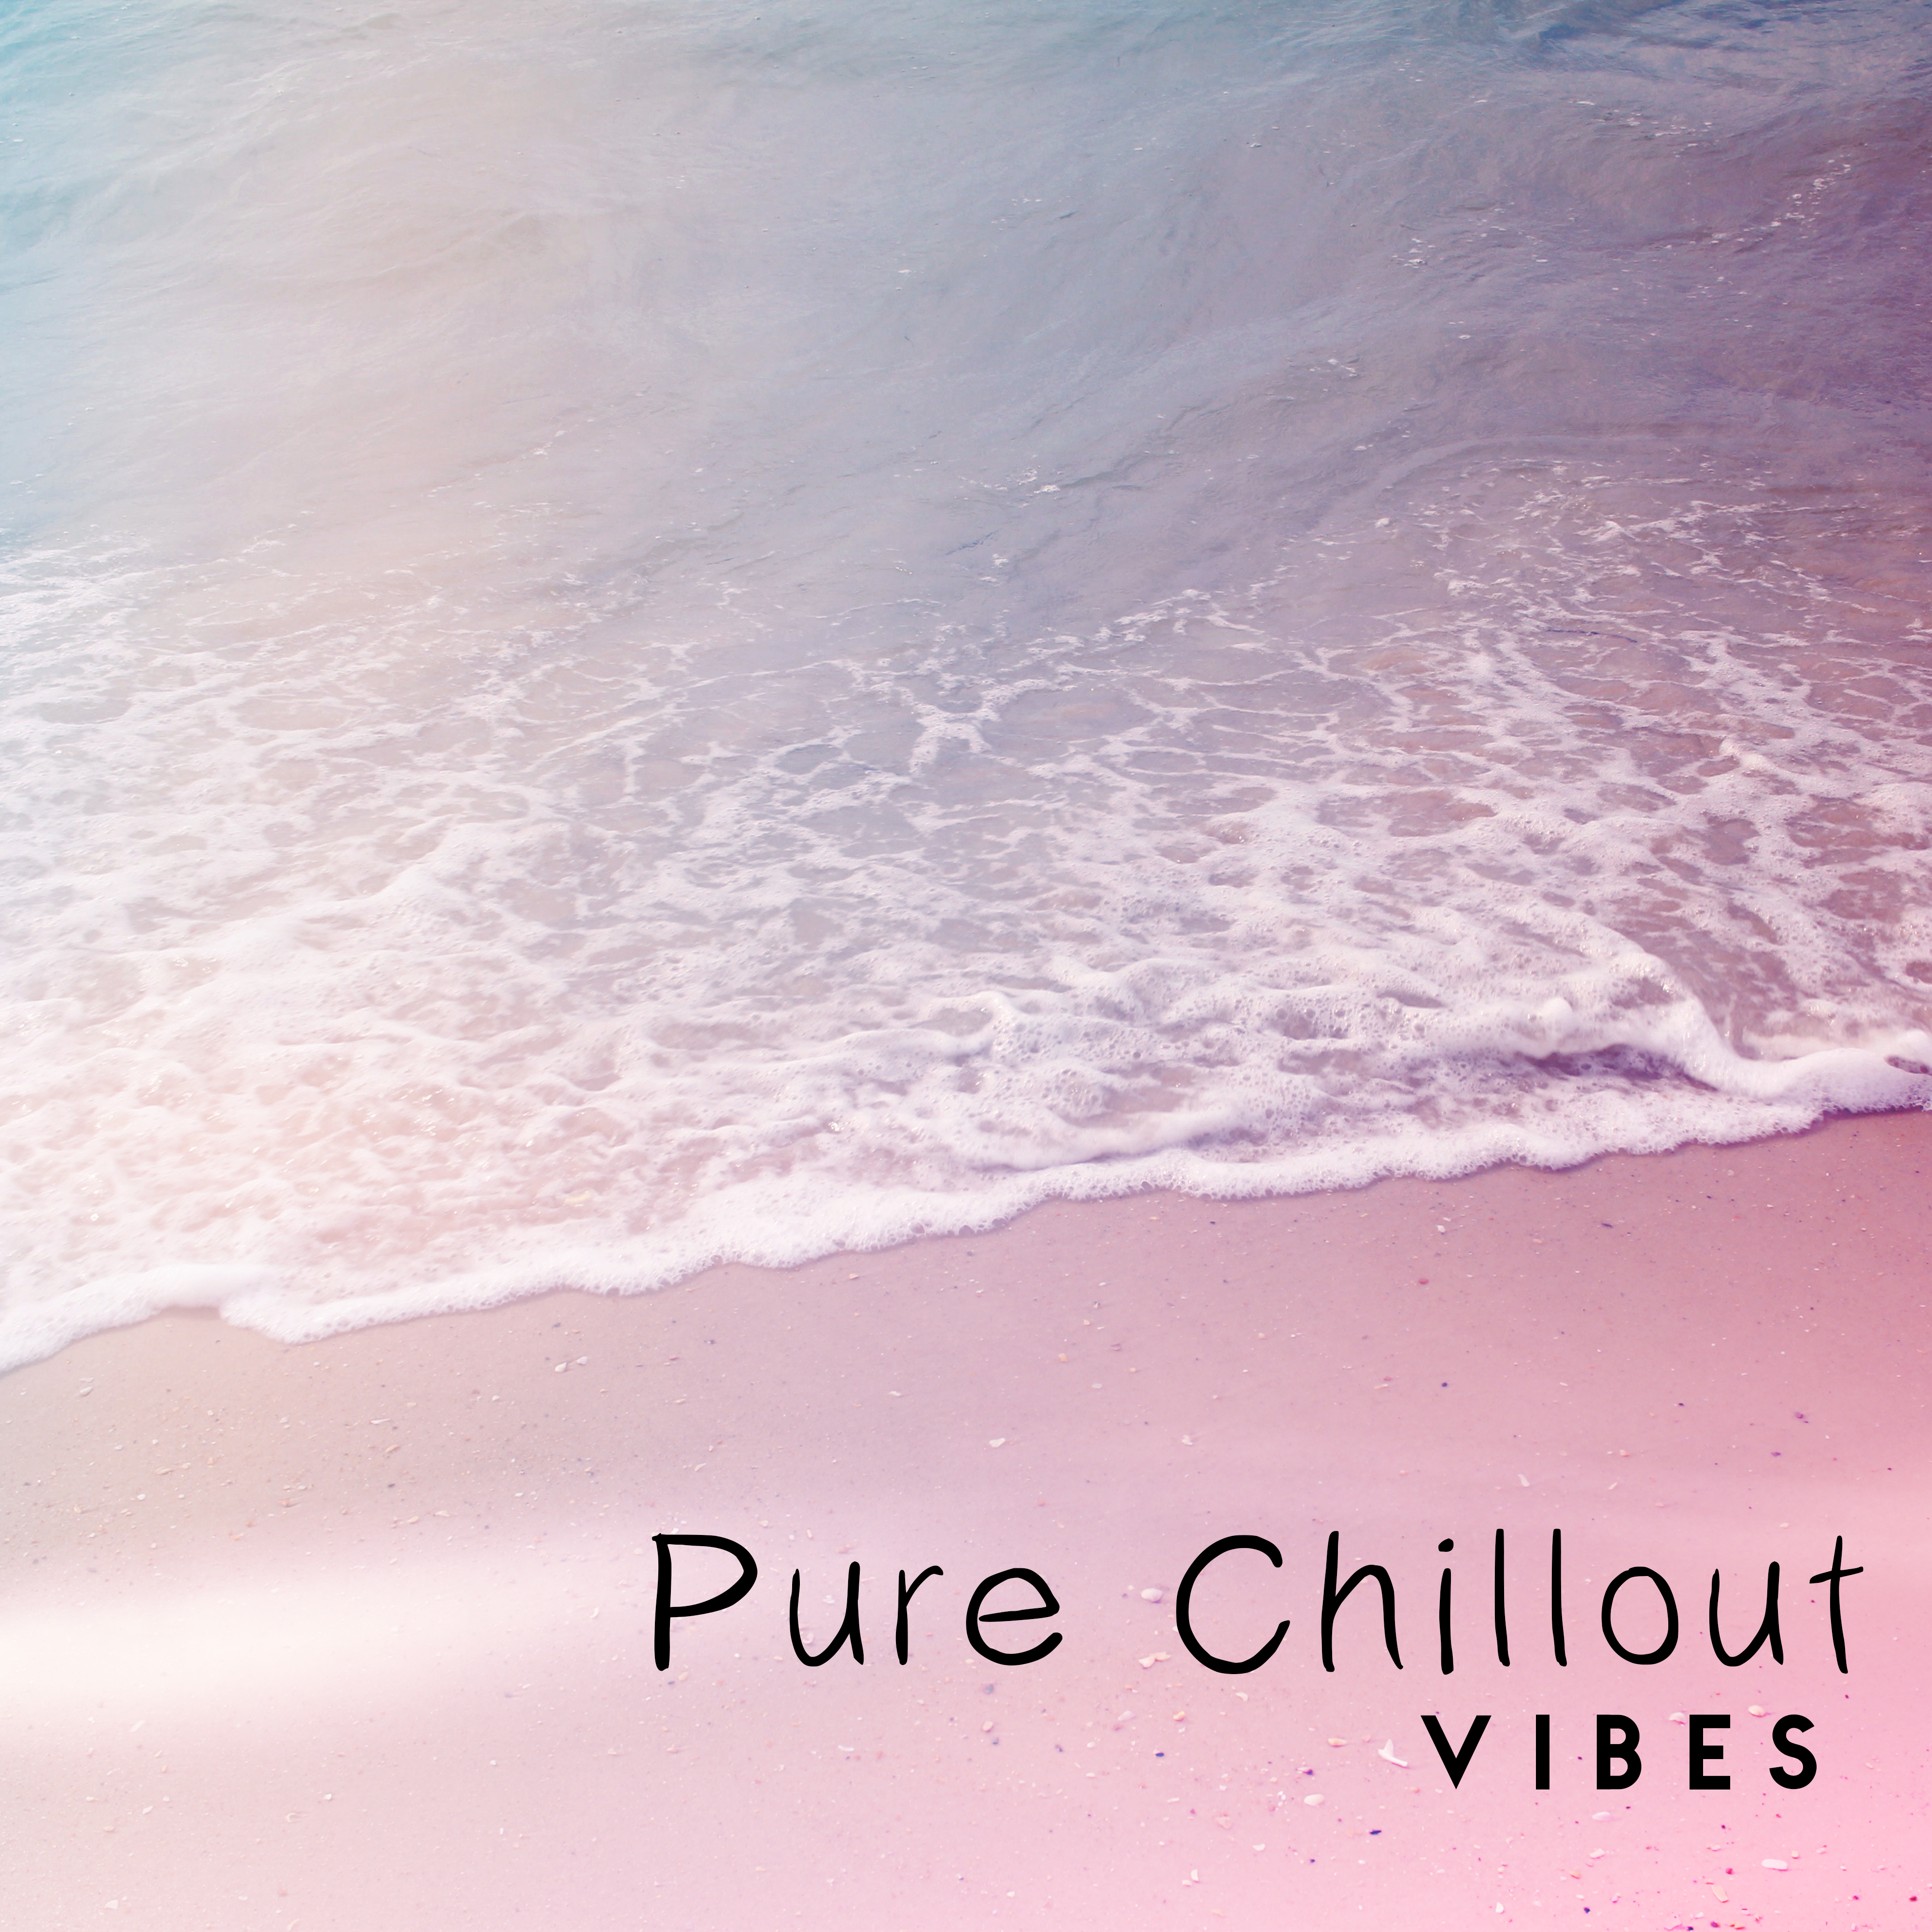 Pure Chillout Vibes